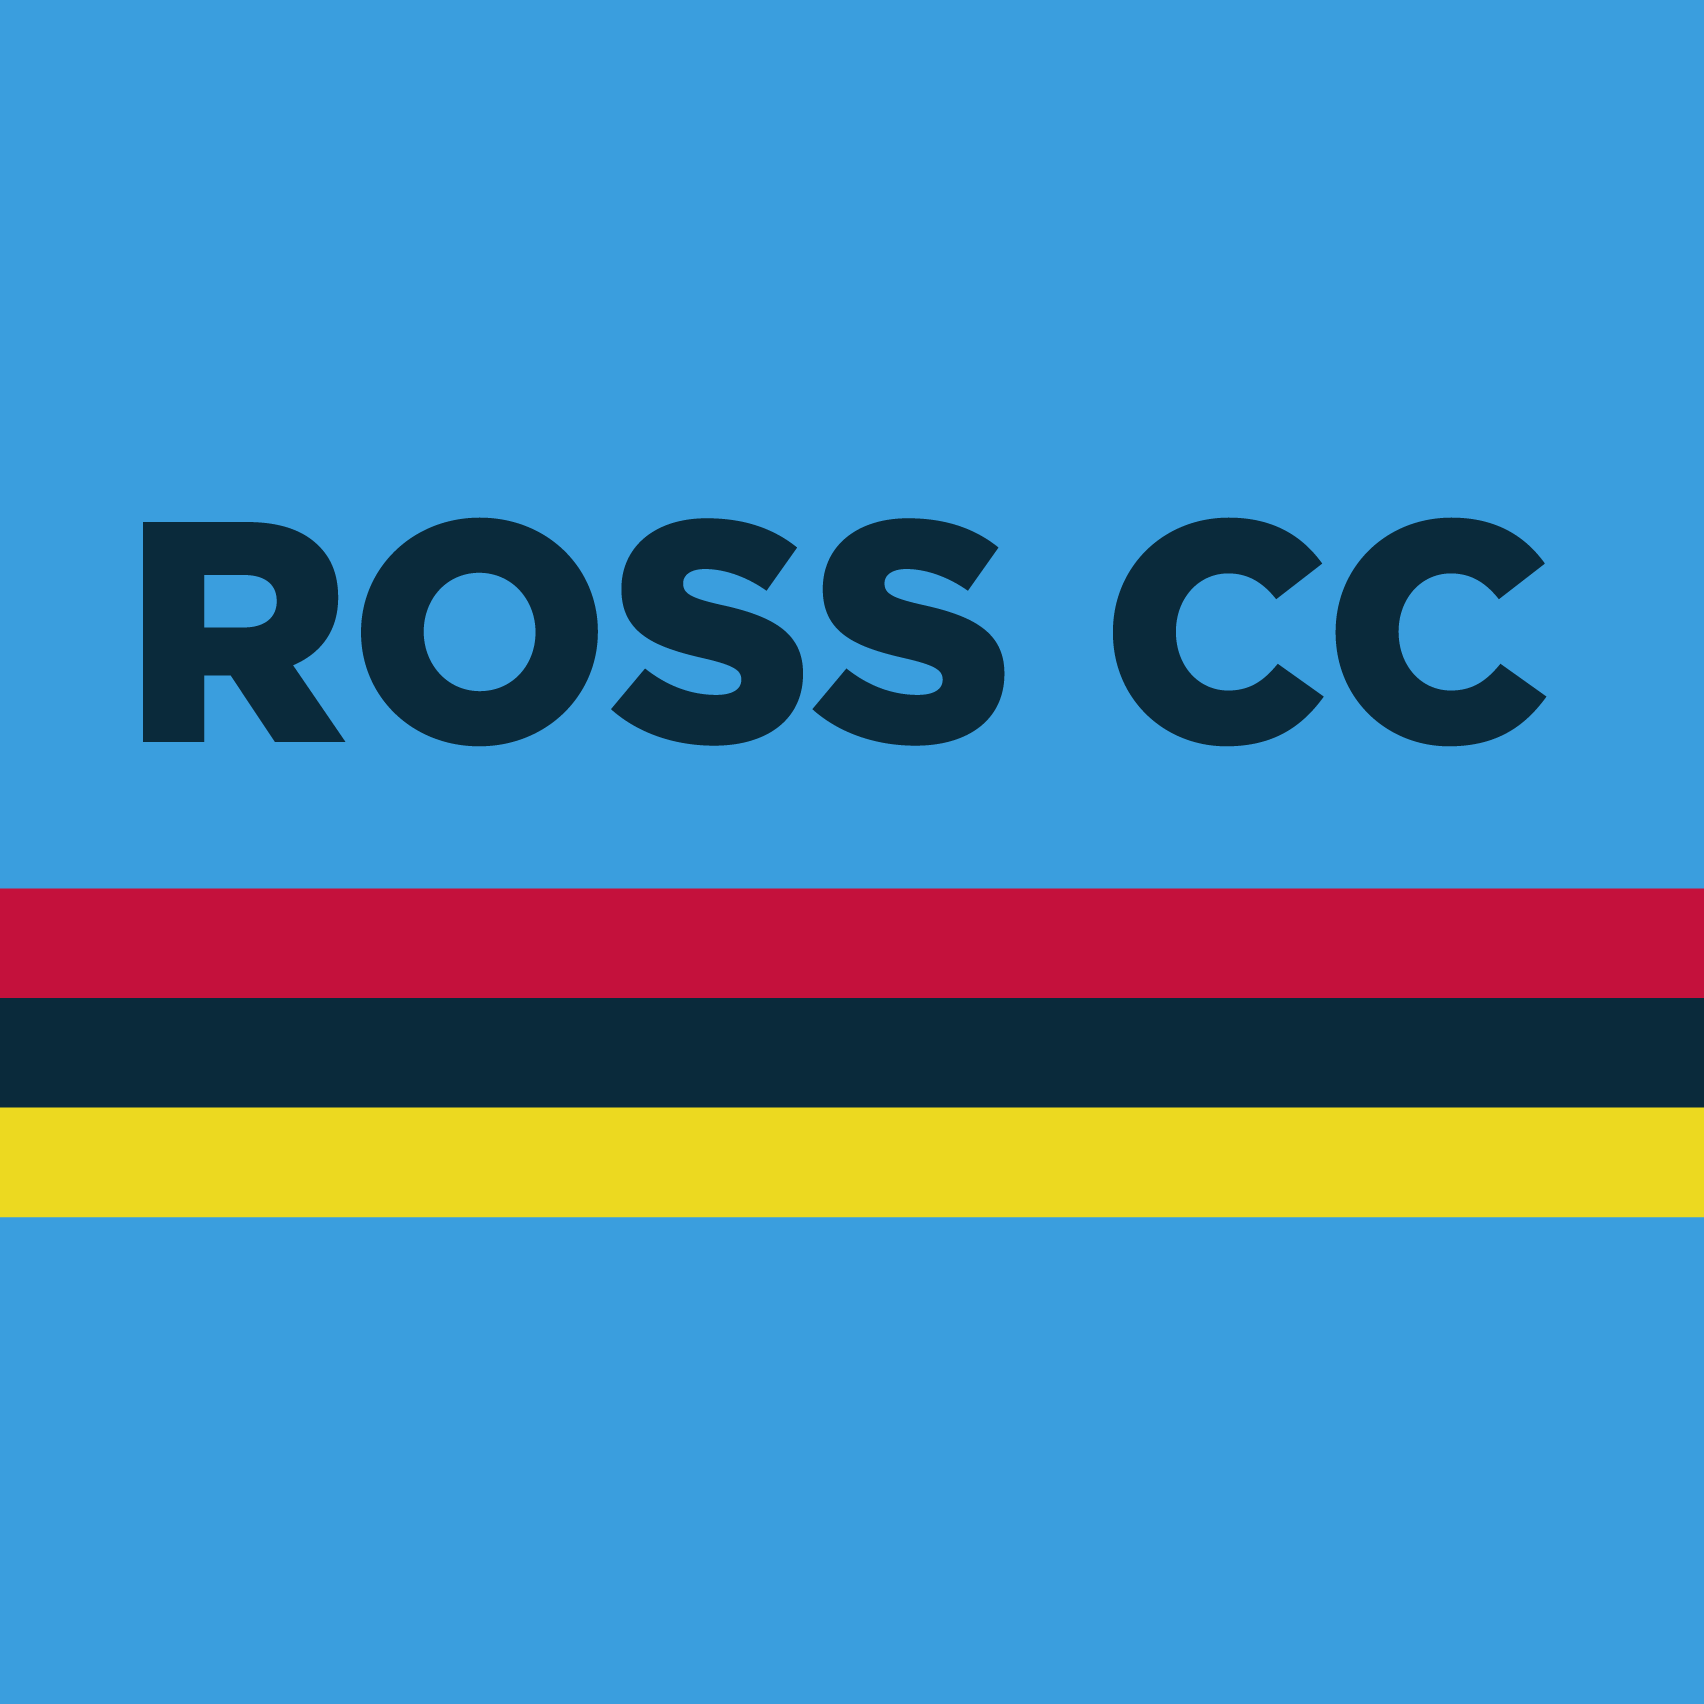 Club Image for ROSS CC